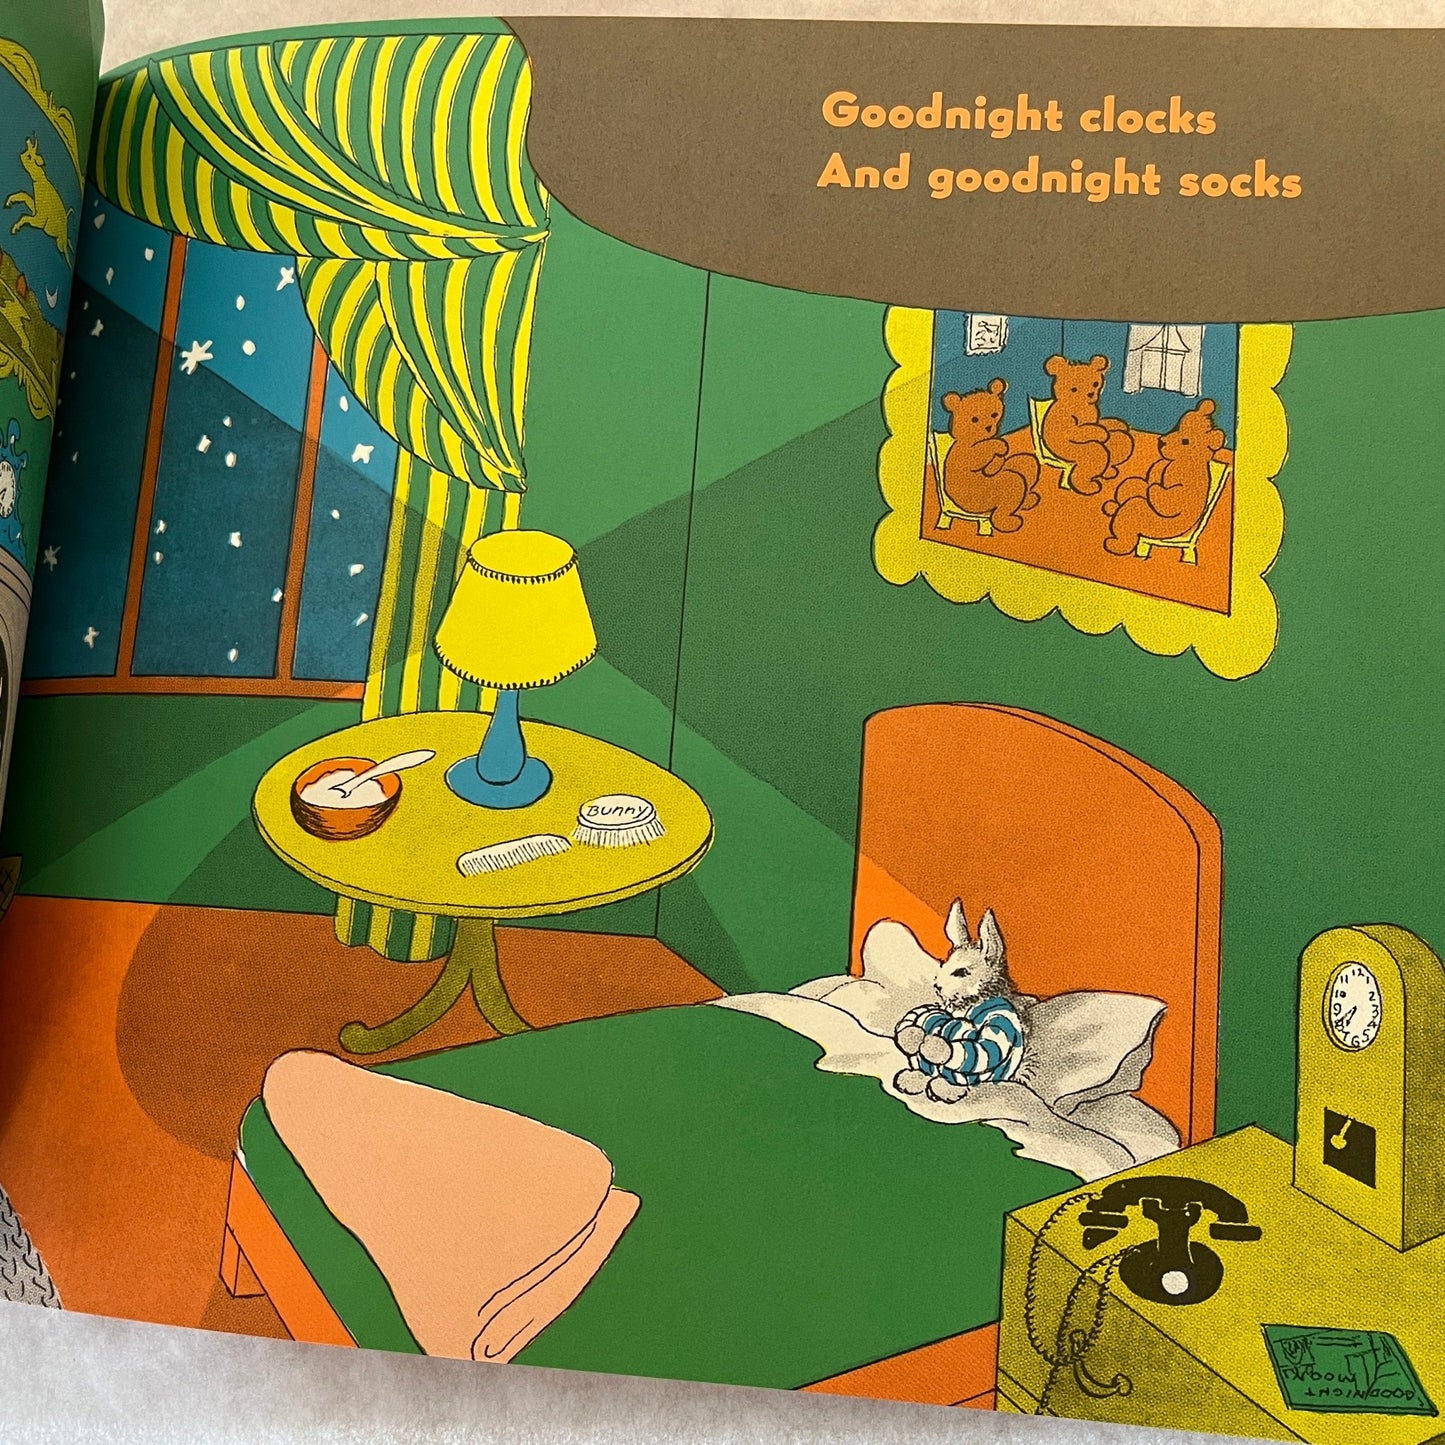 Goodnight Moon softcover book by Margaret Wise Brown, pictures by Clement Hurd